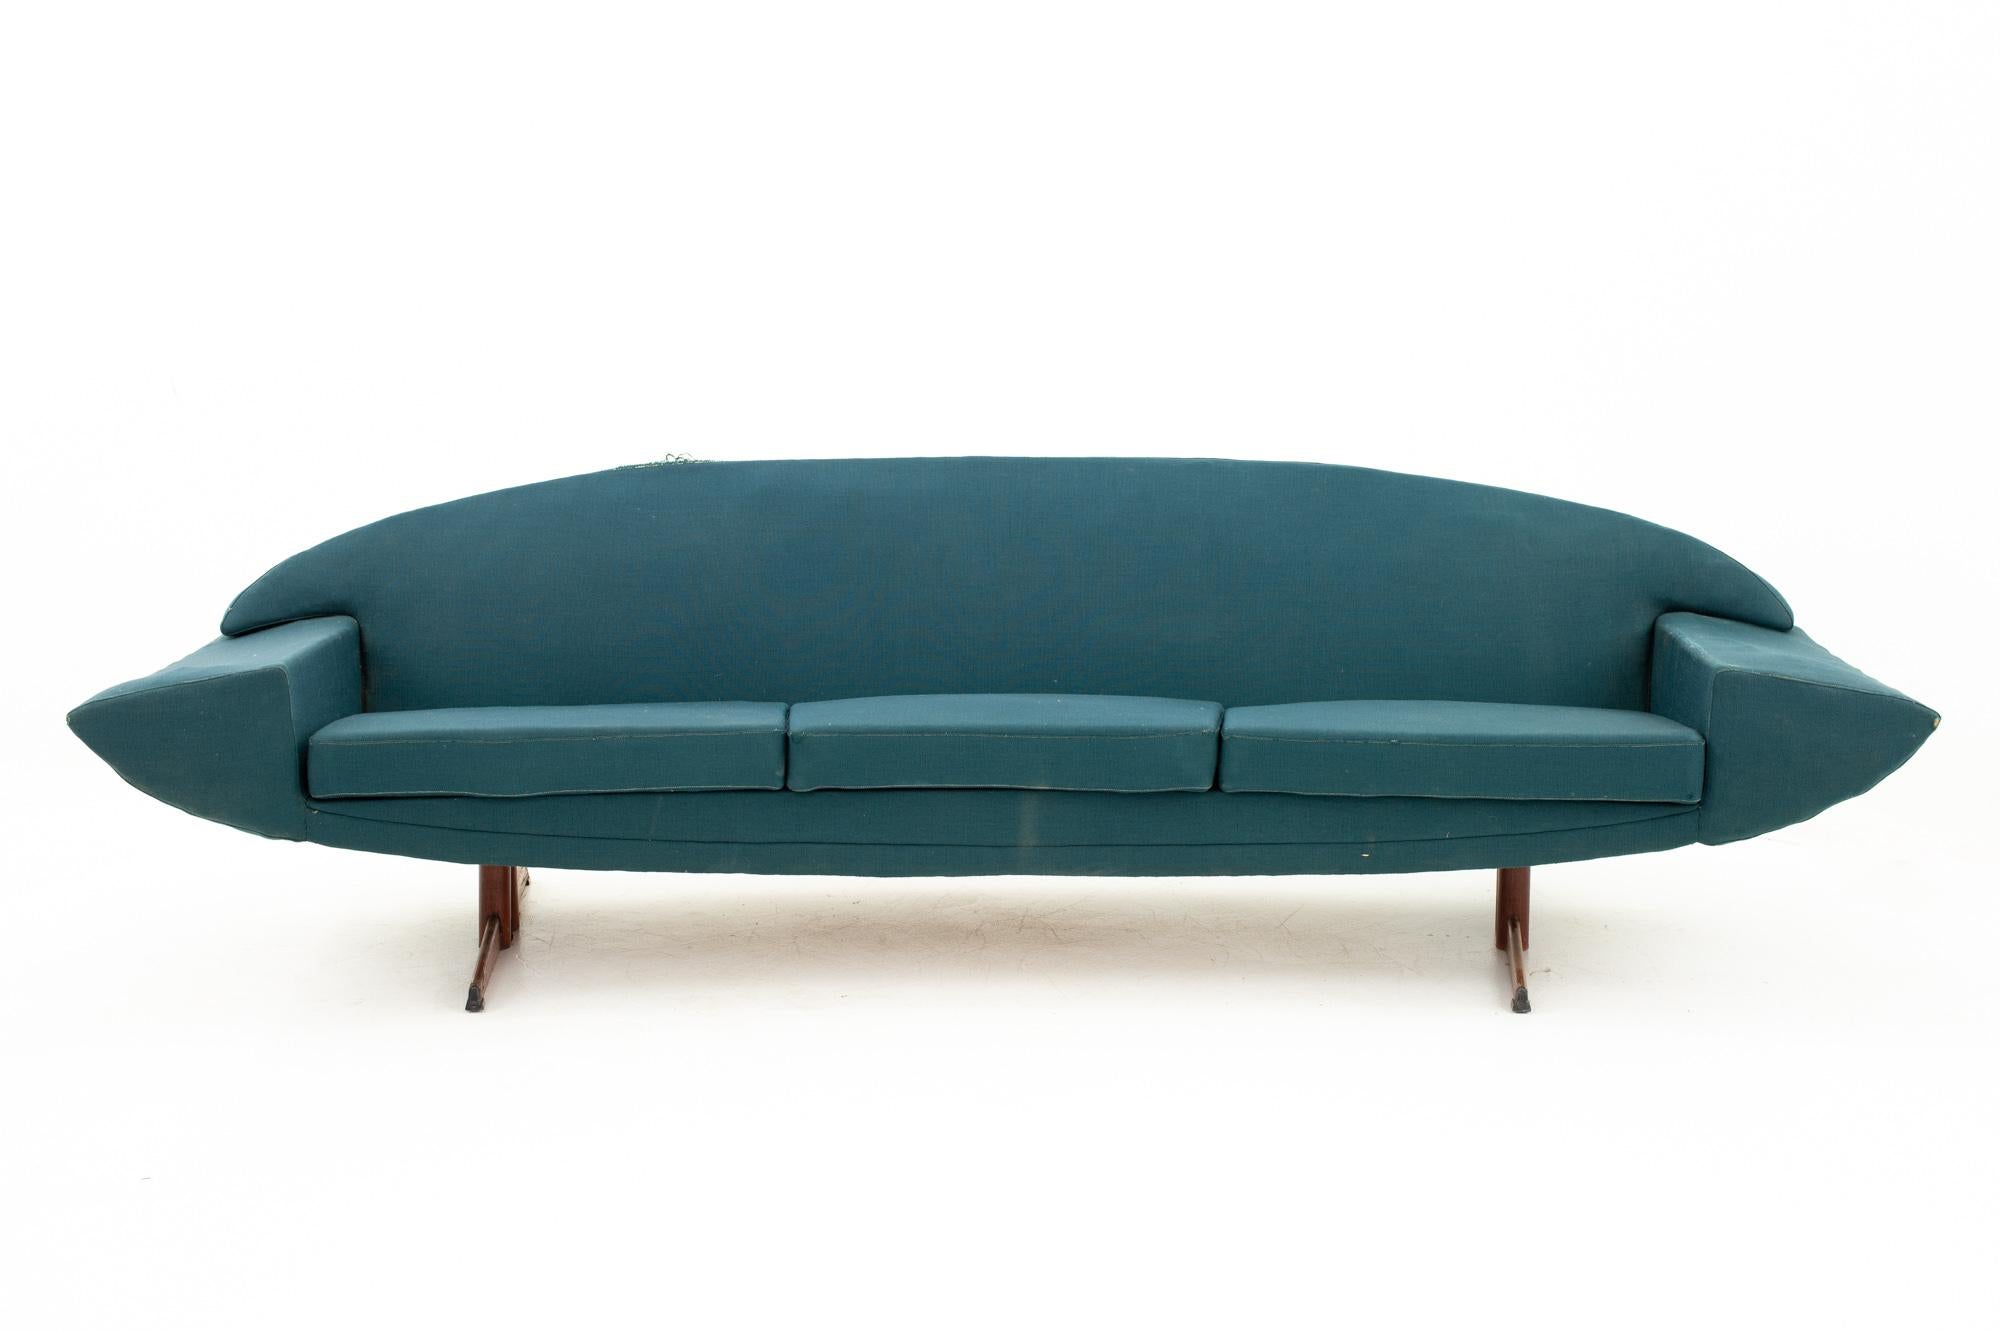 Johannes Andersen midcentury Capri sofa.
Sofa measures: 97 wide x 30 deep x 28.5 high, with a seat height of 14.5 inches

This piece is available in what we call restored vintage condition. Upon purchase it is thoroughly cleaned and minor repairs